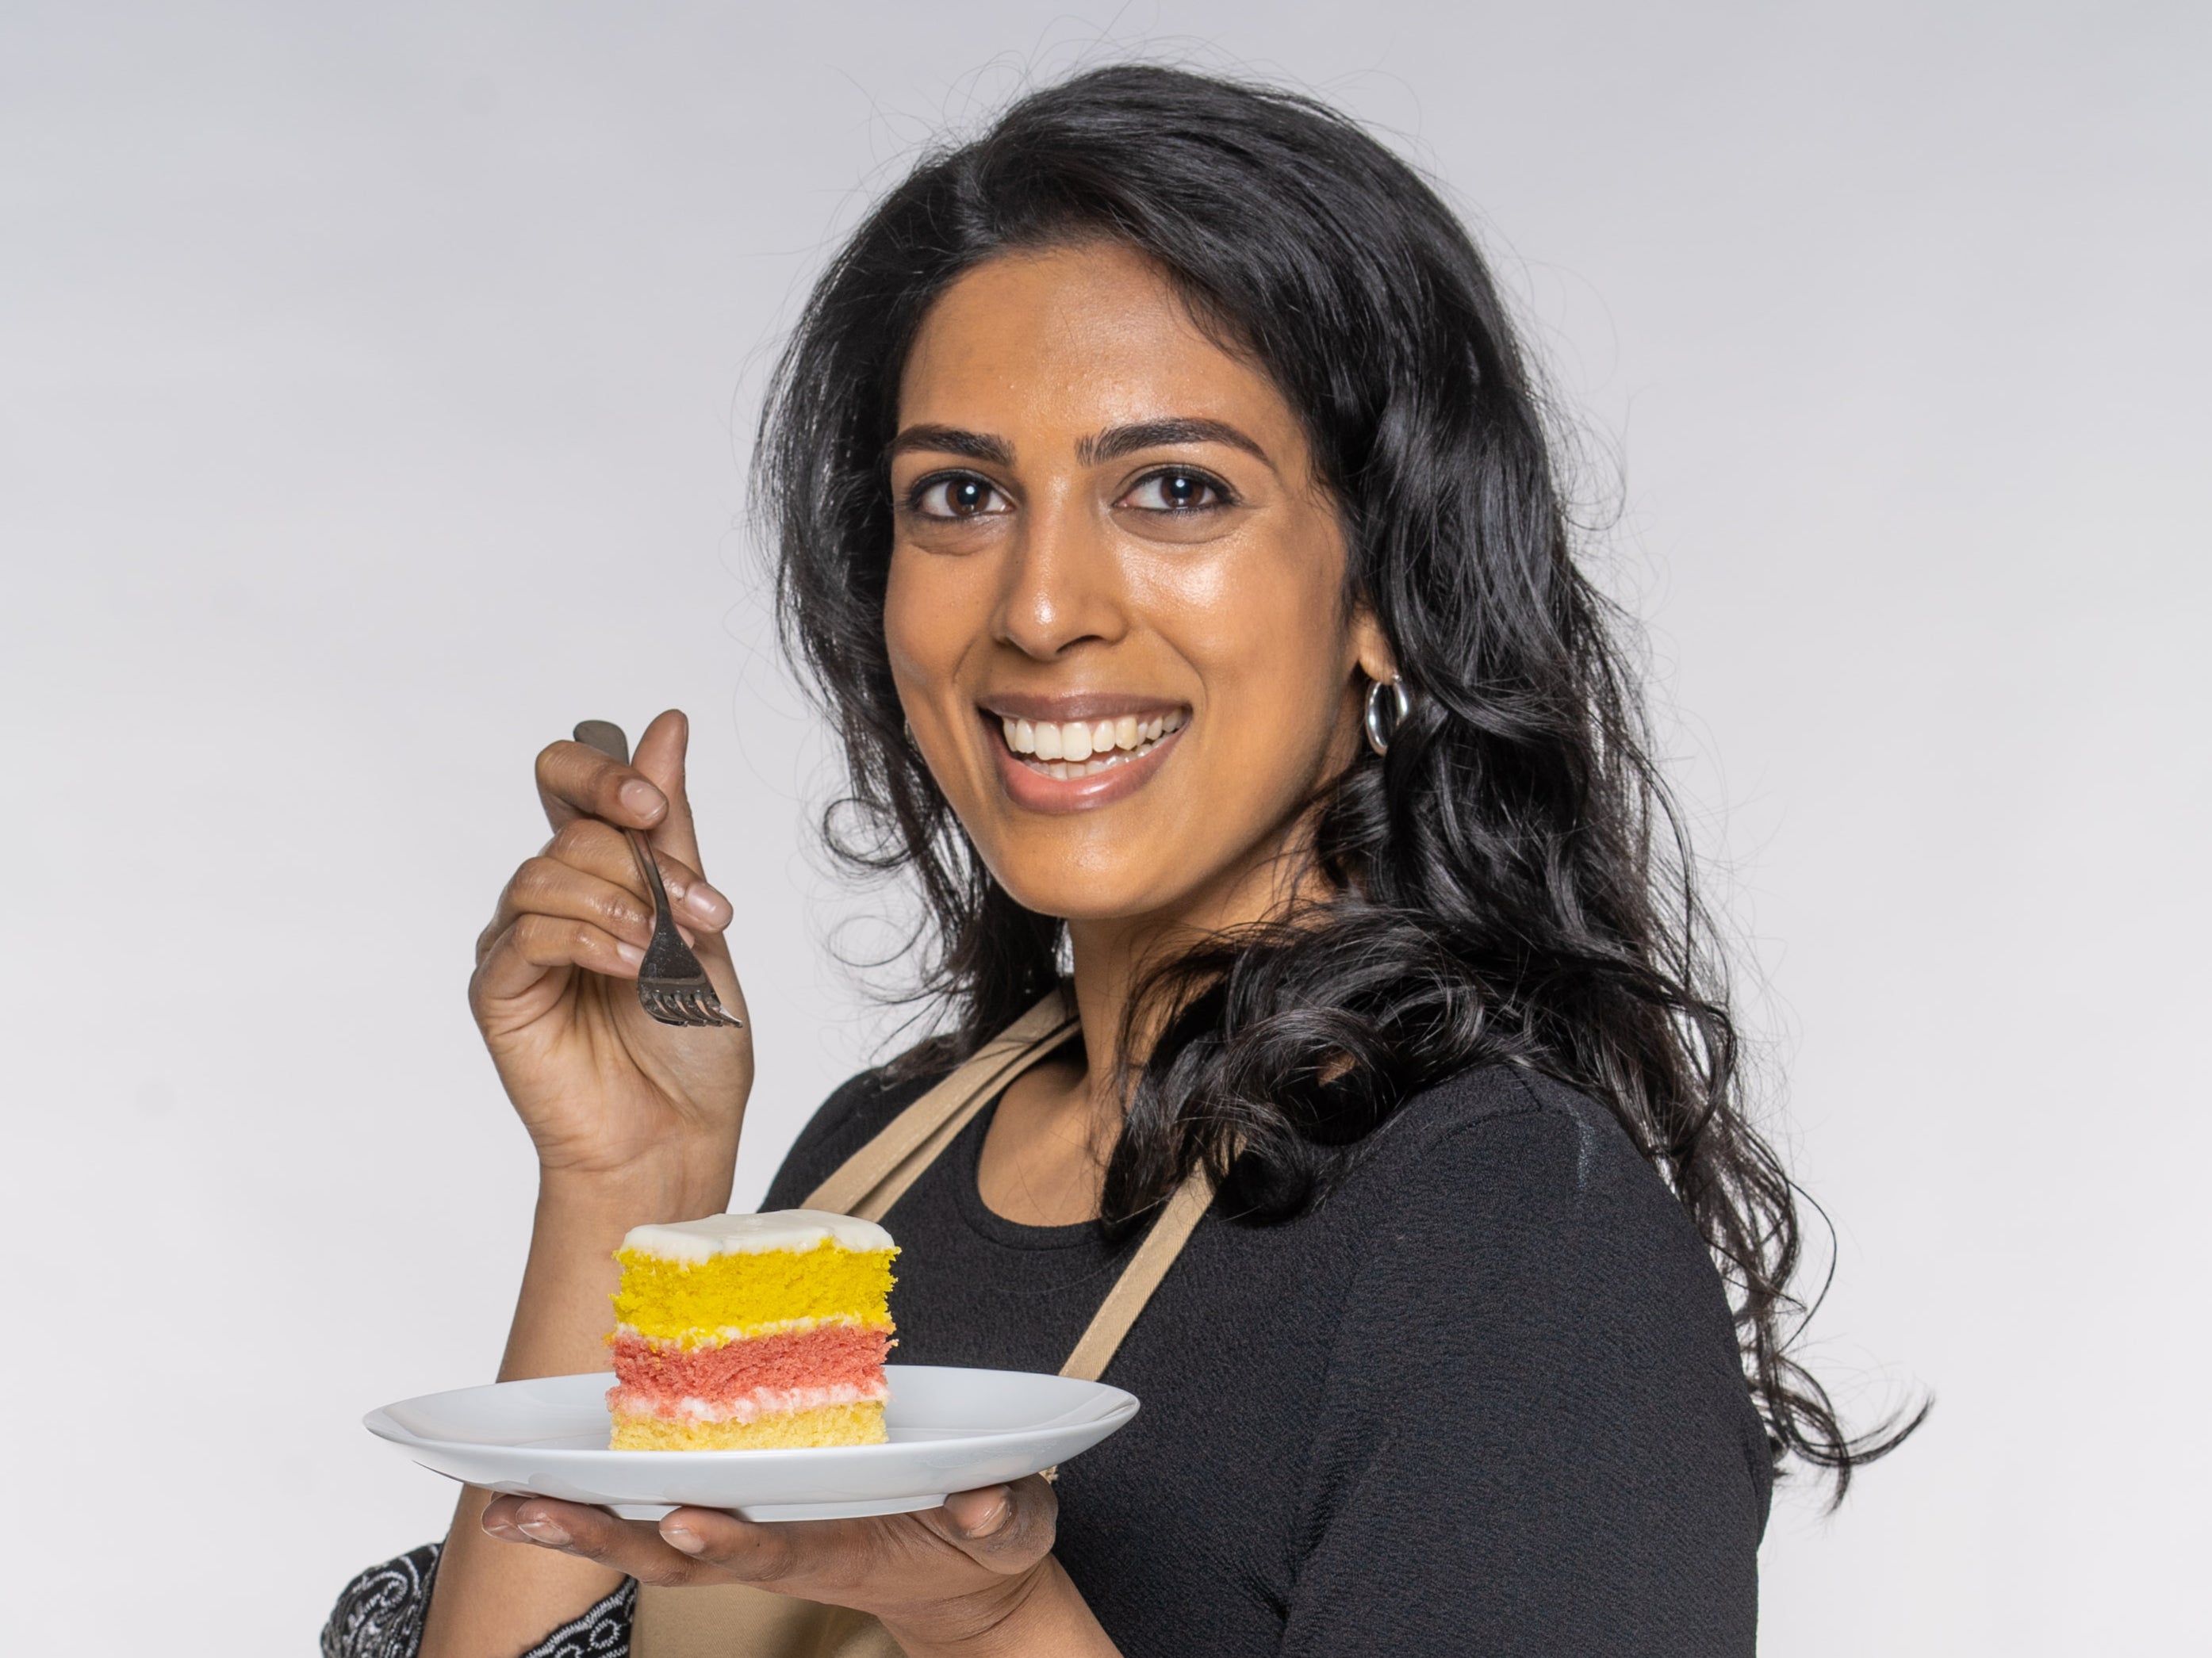 ‘Bake Off’ contestant Crystelle